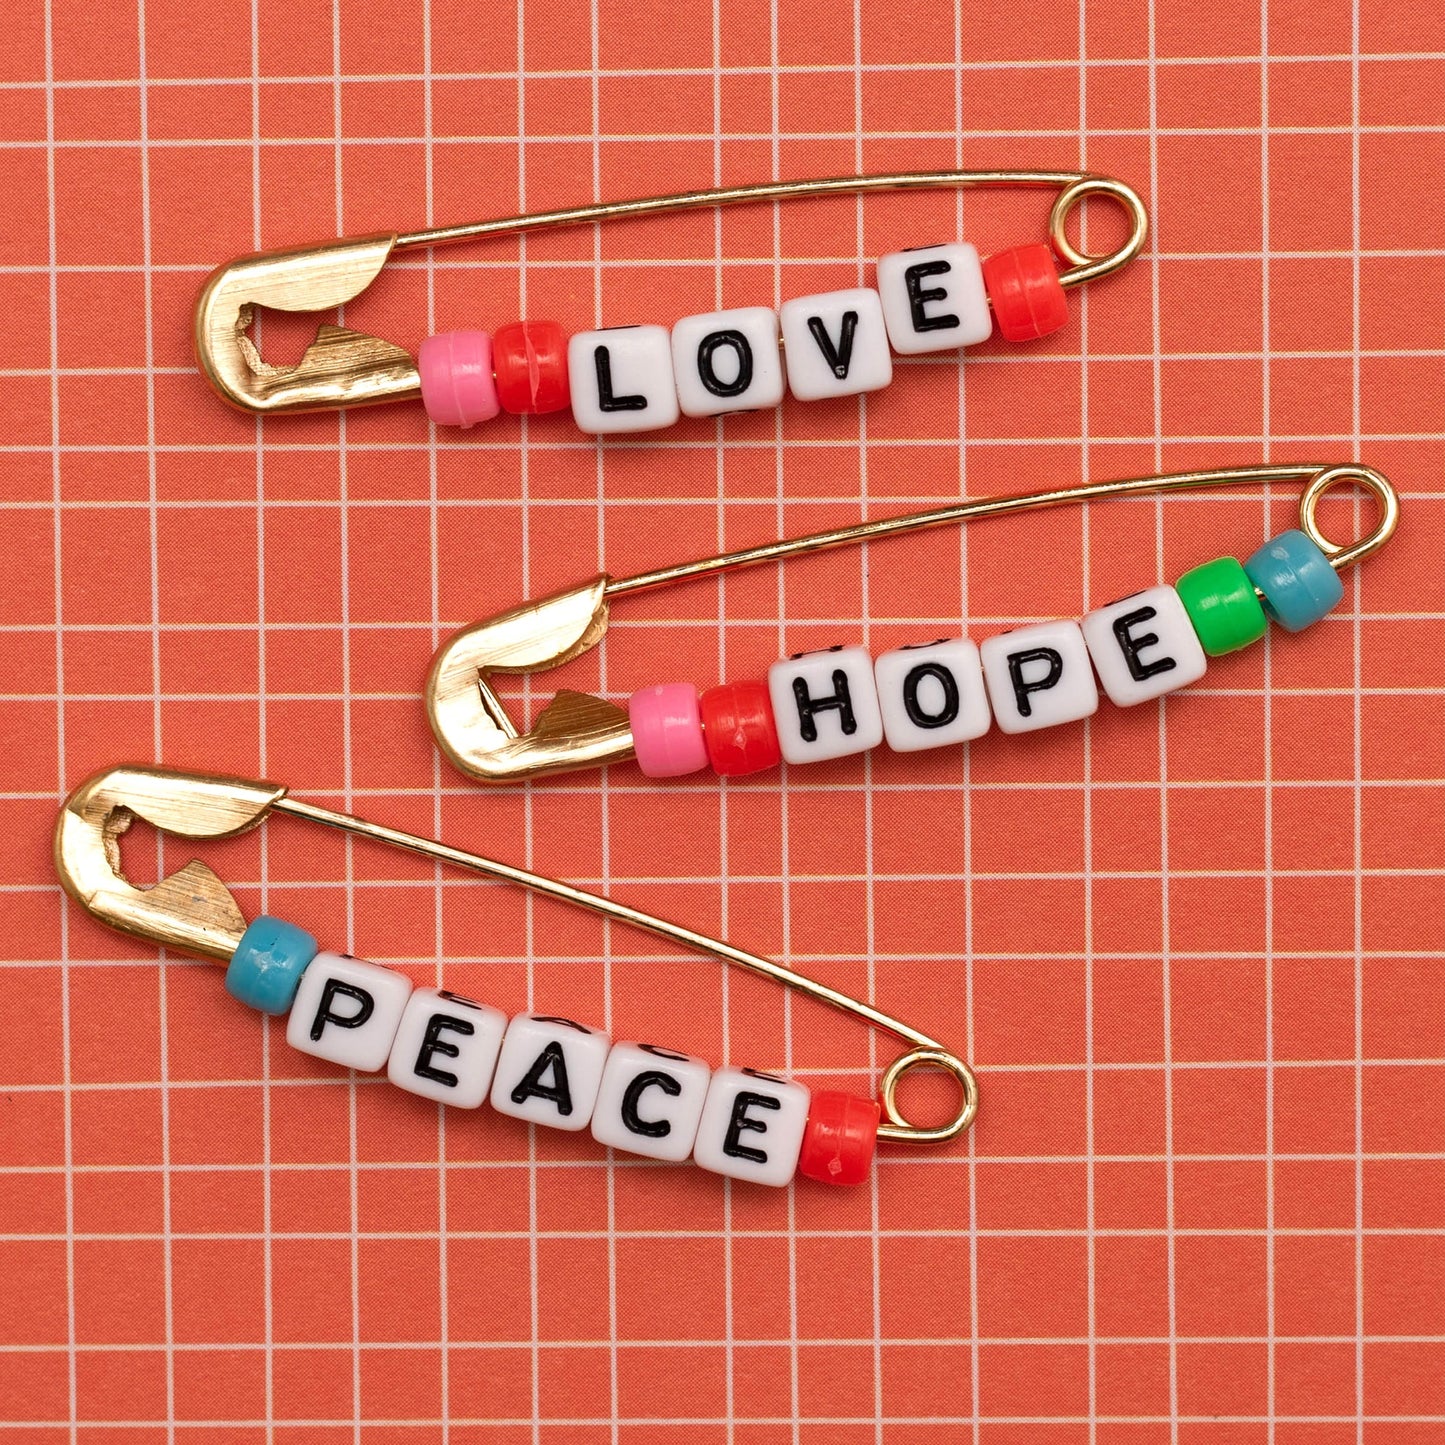 Jen Hadfield Reaching Out Metal Safety Pins-W/Phrase Beads